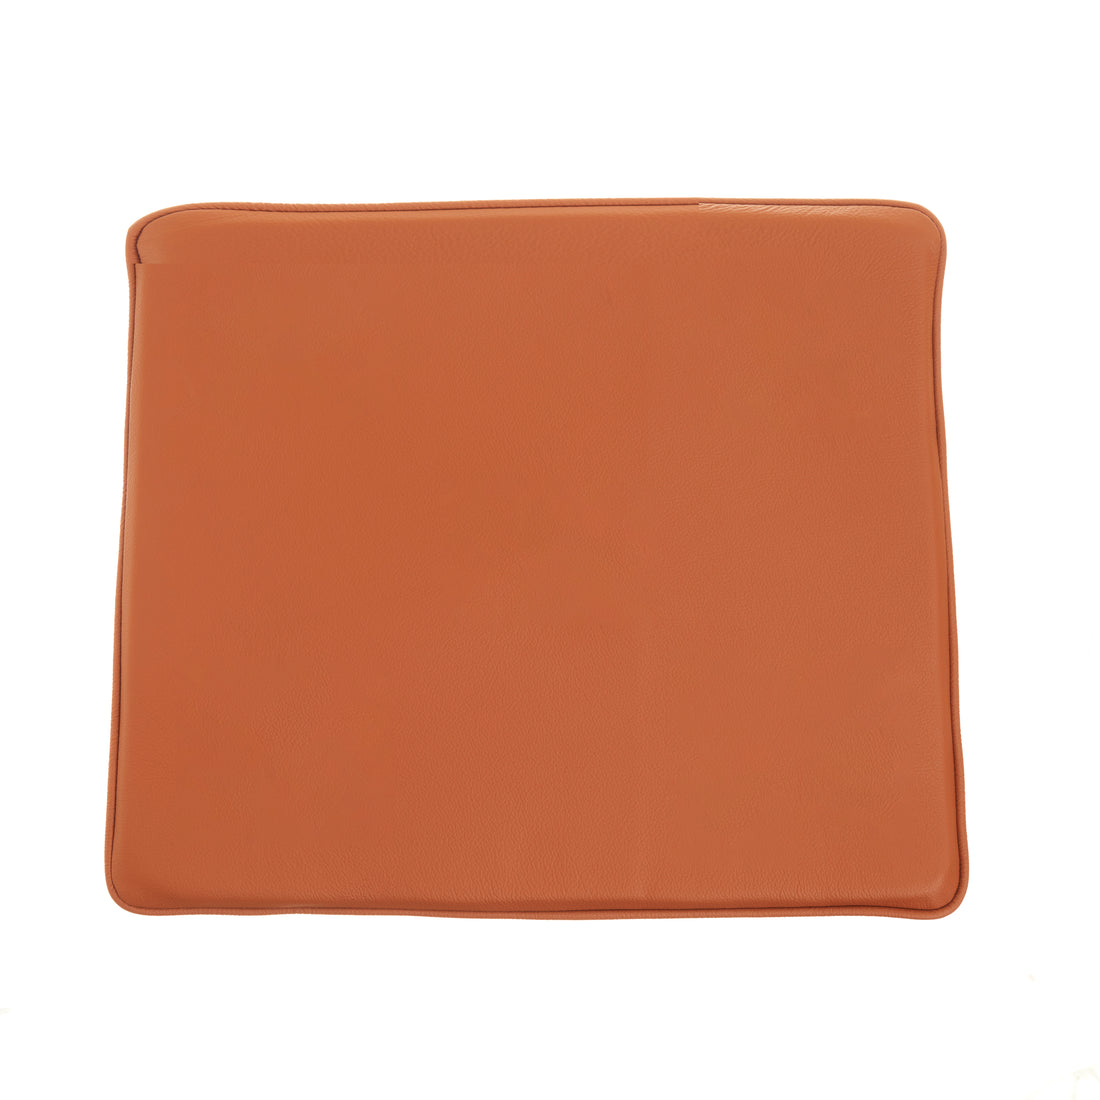 Leather cushion for the PP66 Chinese chair in cognac leather without buttons